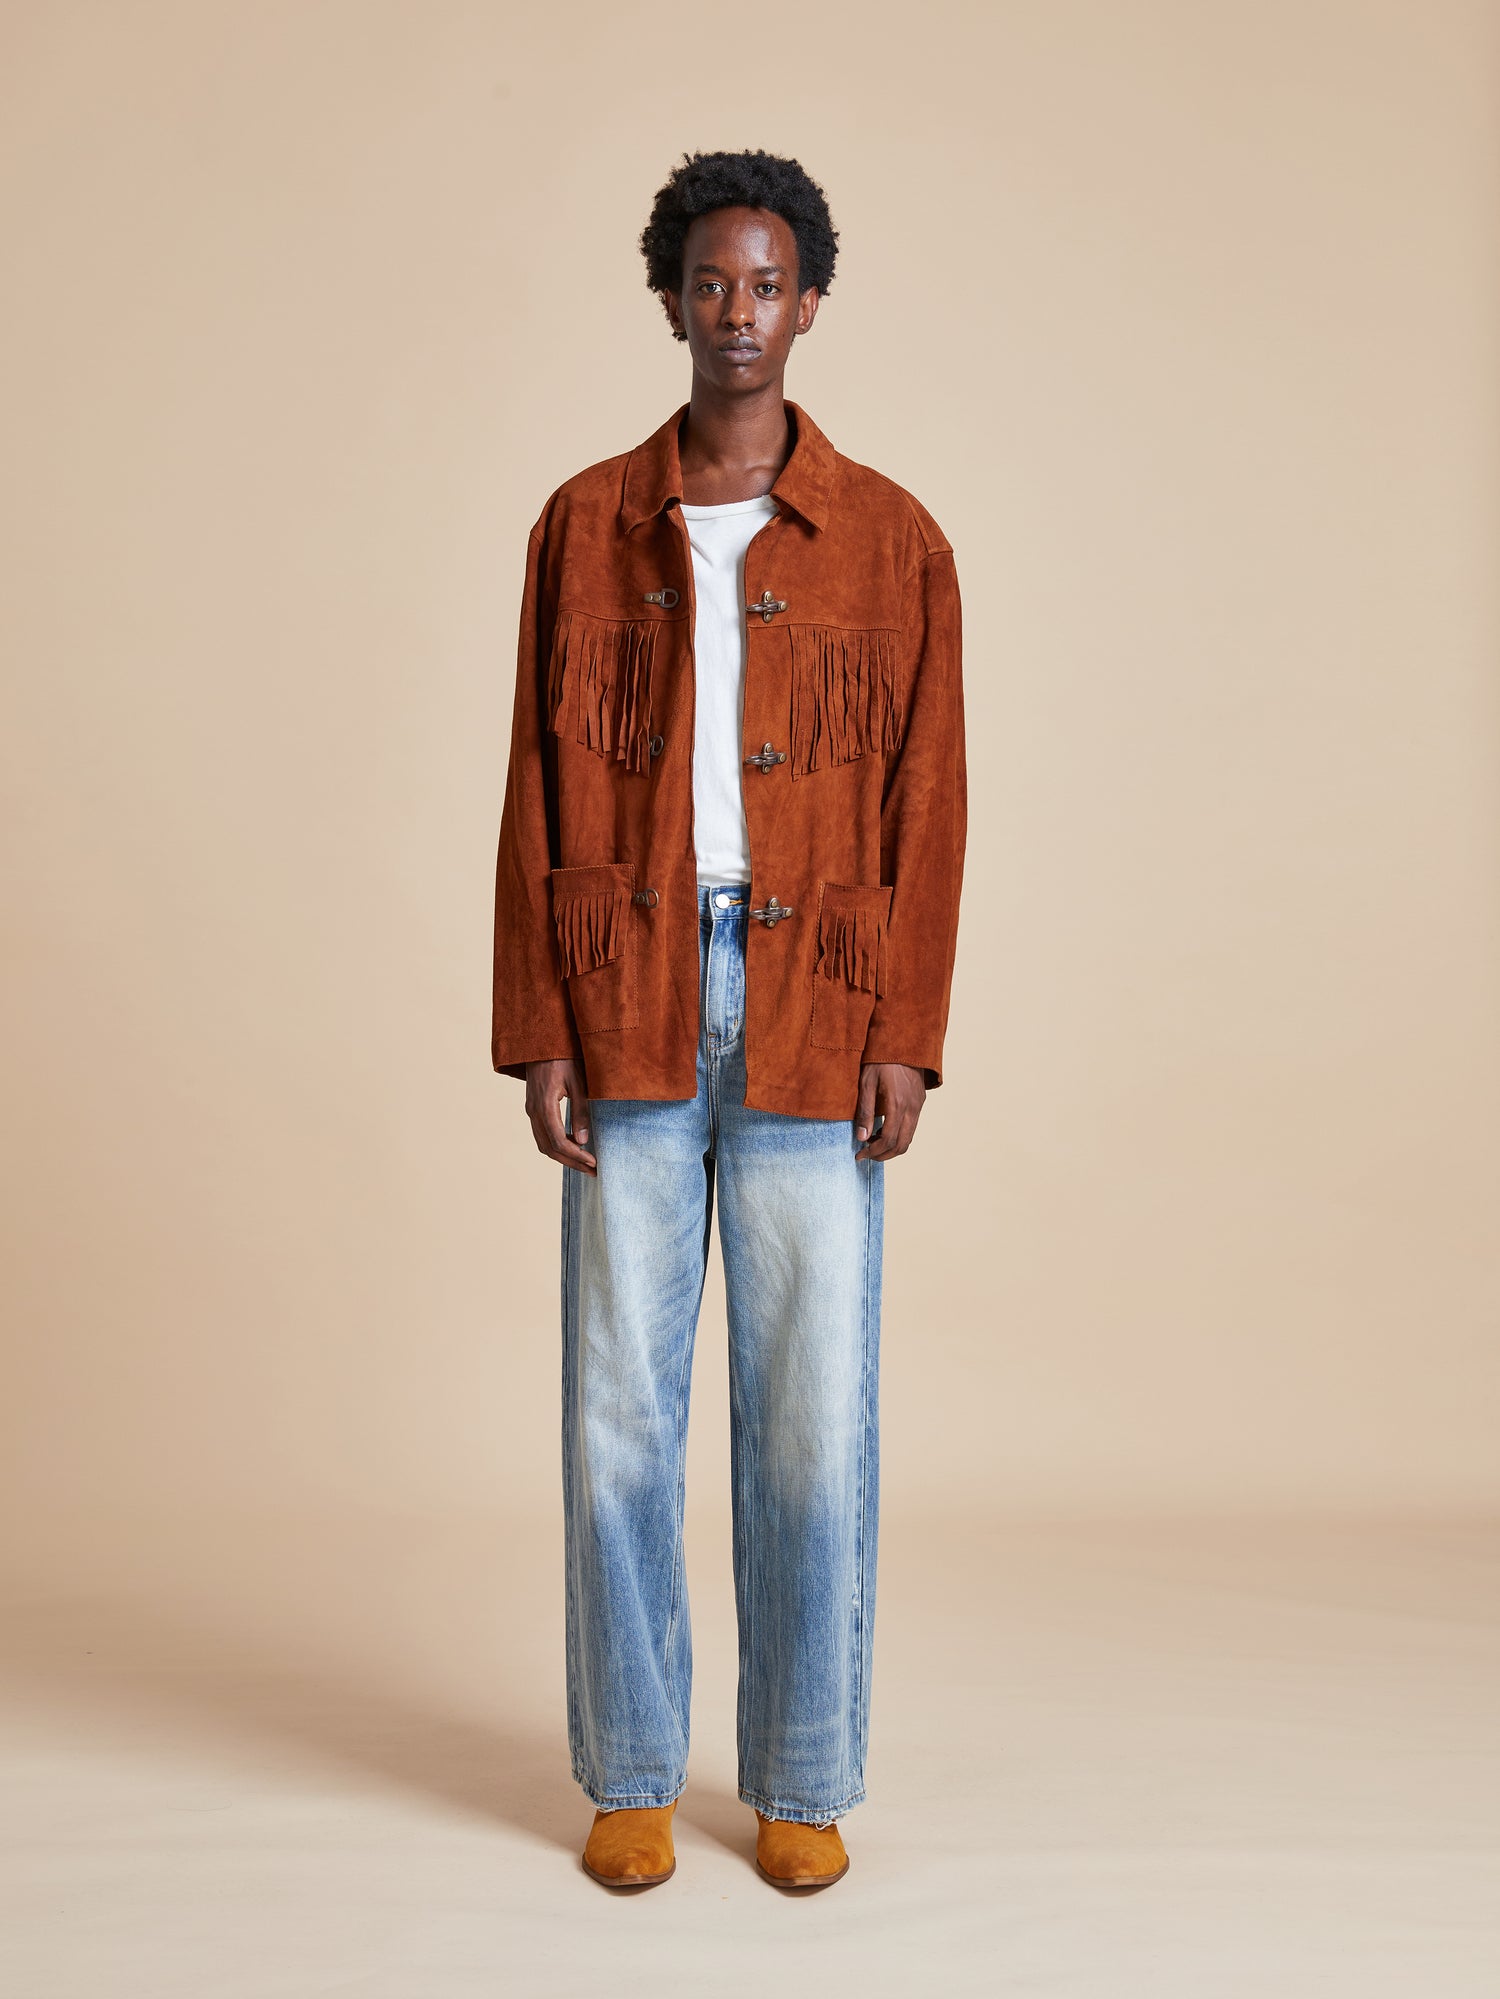 The model is wearing a Found Tobacco Fringe Suede Buckle Jacket and jeans.